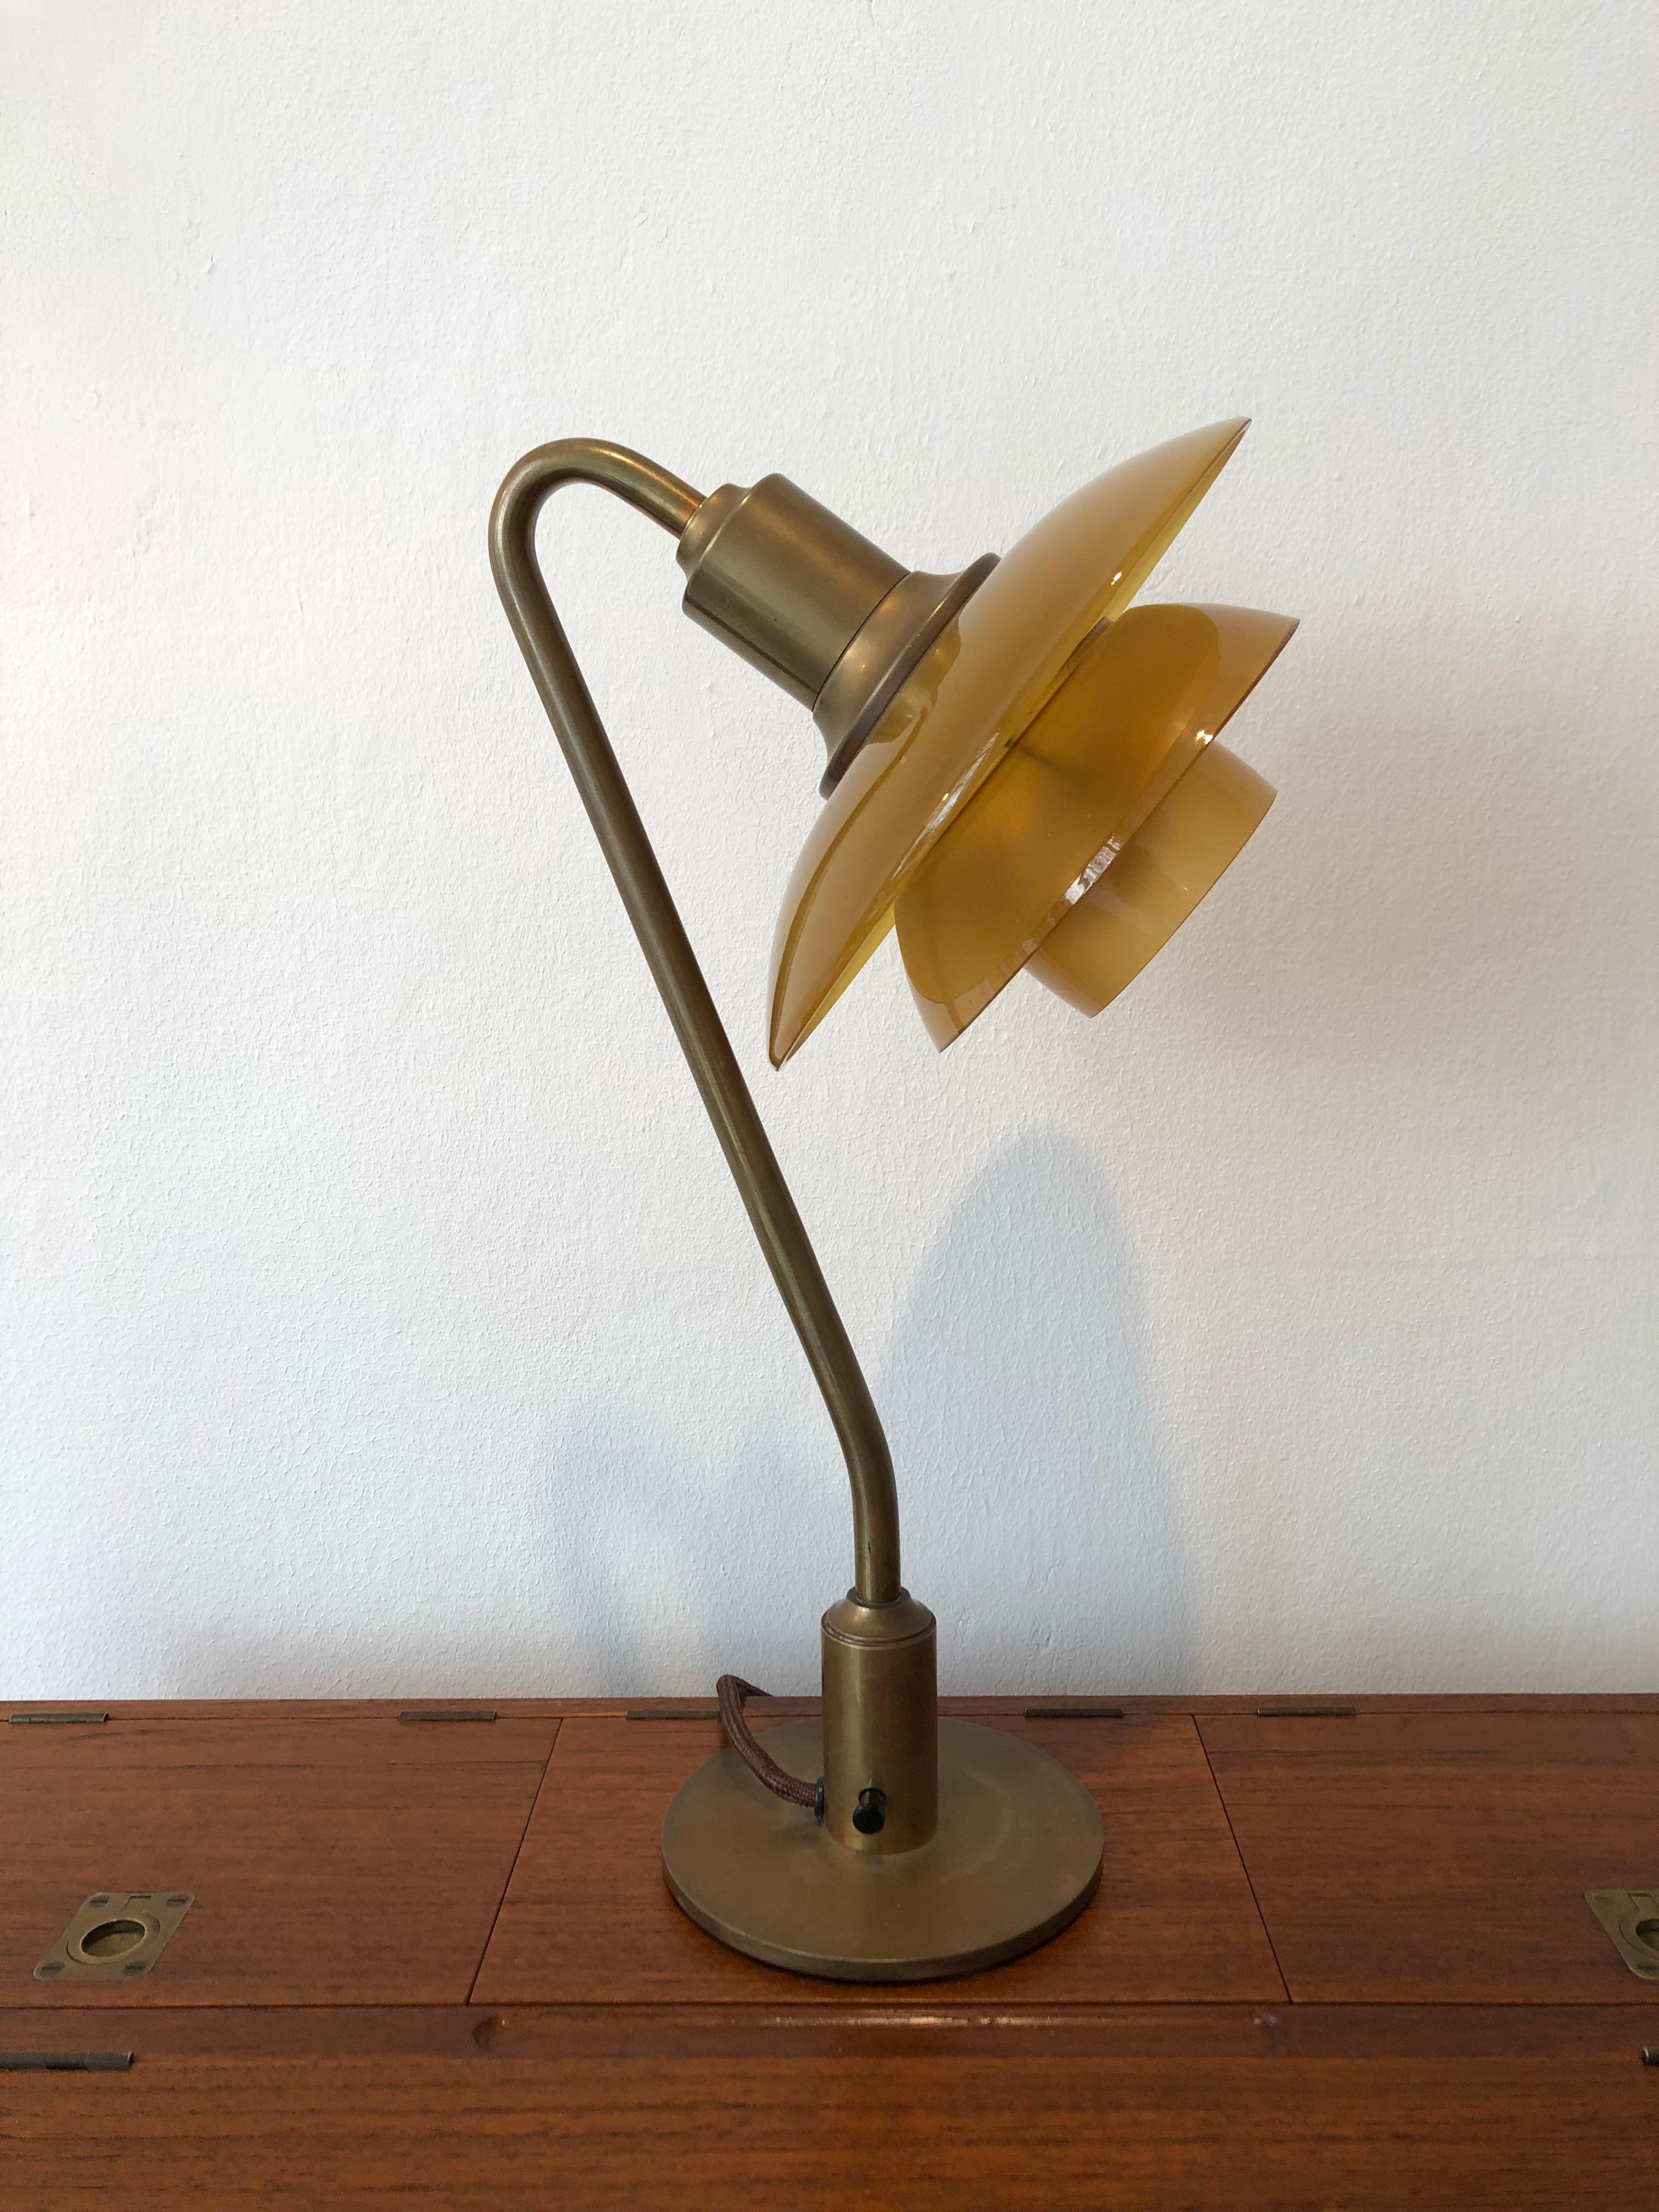 Poul Henningsen, 'Snowdrop' desk lamp, model 2/2 in brass with amber colored glass shades. This model manufactured 1931–1933 by Louis Poulsen, Denmark. Stamped 'PH2 PATENTED'.

Literature:
“Light Years Ahead”, ill. p. 164.